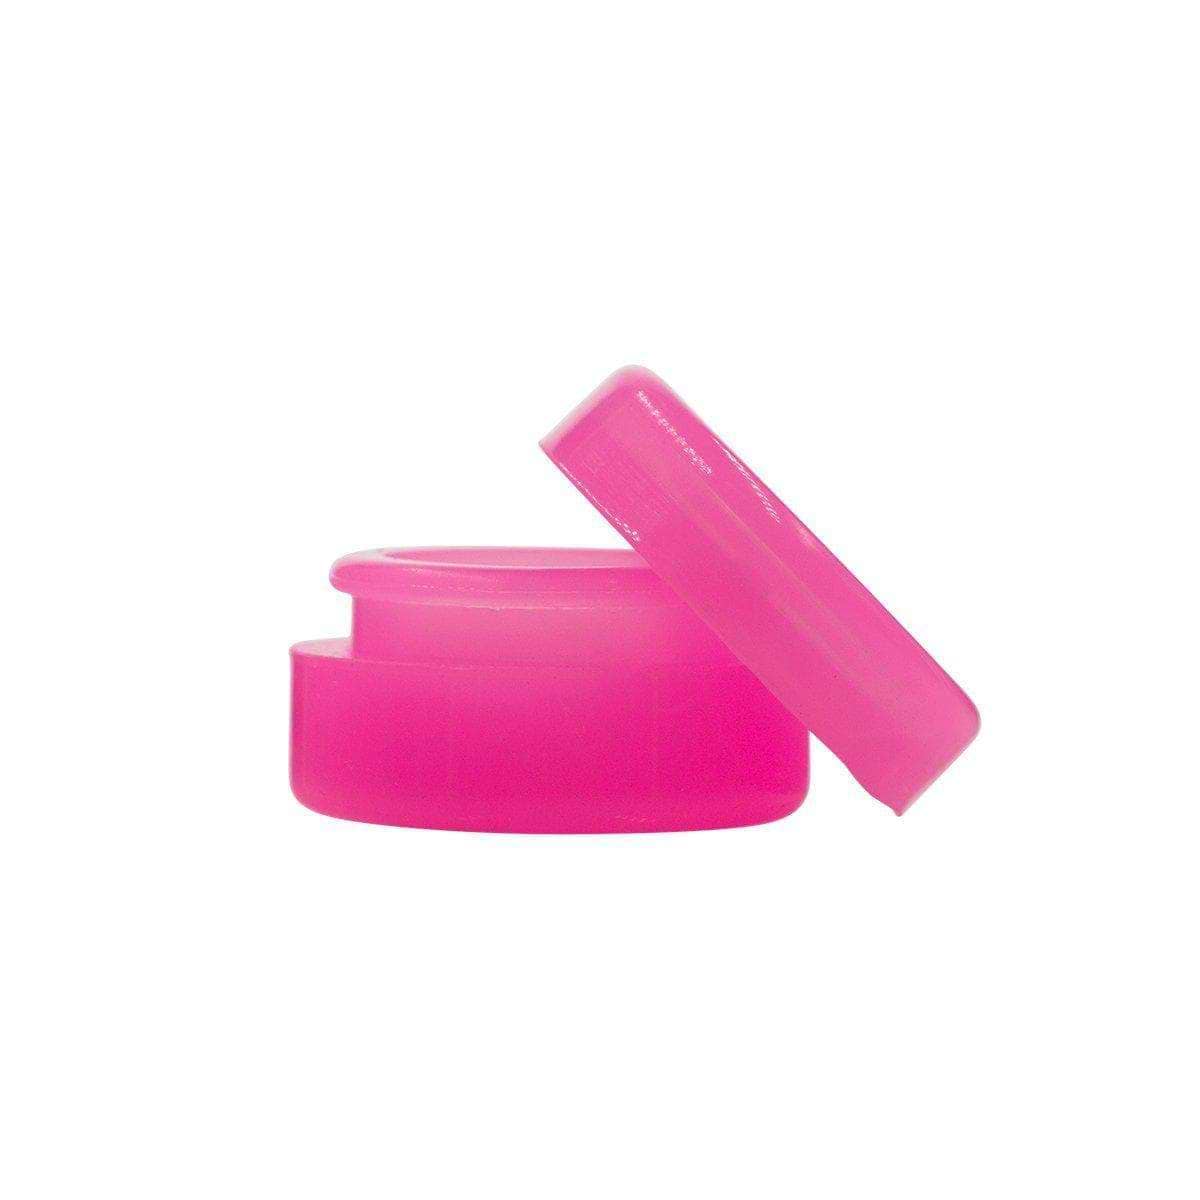 Silicon pink wax container